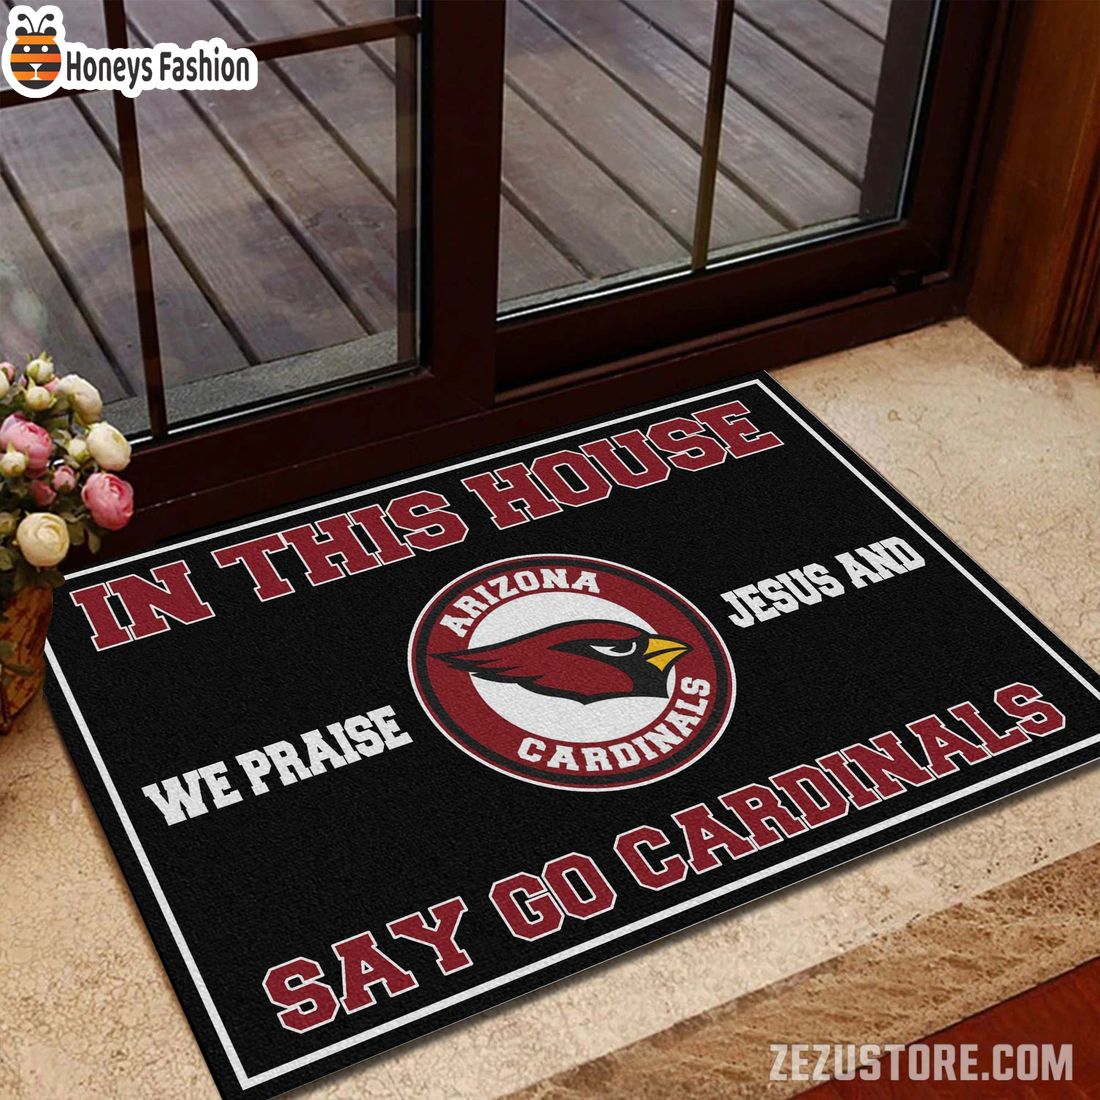 In this house we praise jesus and say go Cardinals doormat